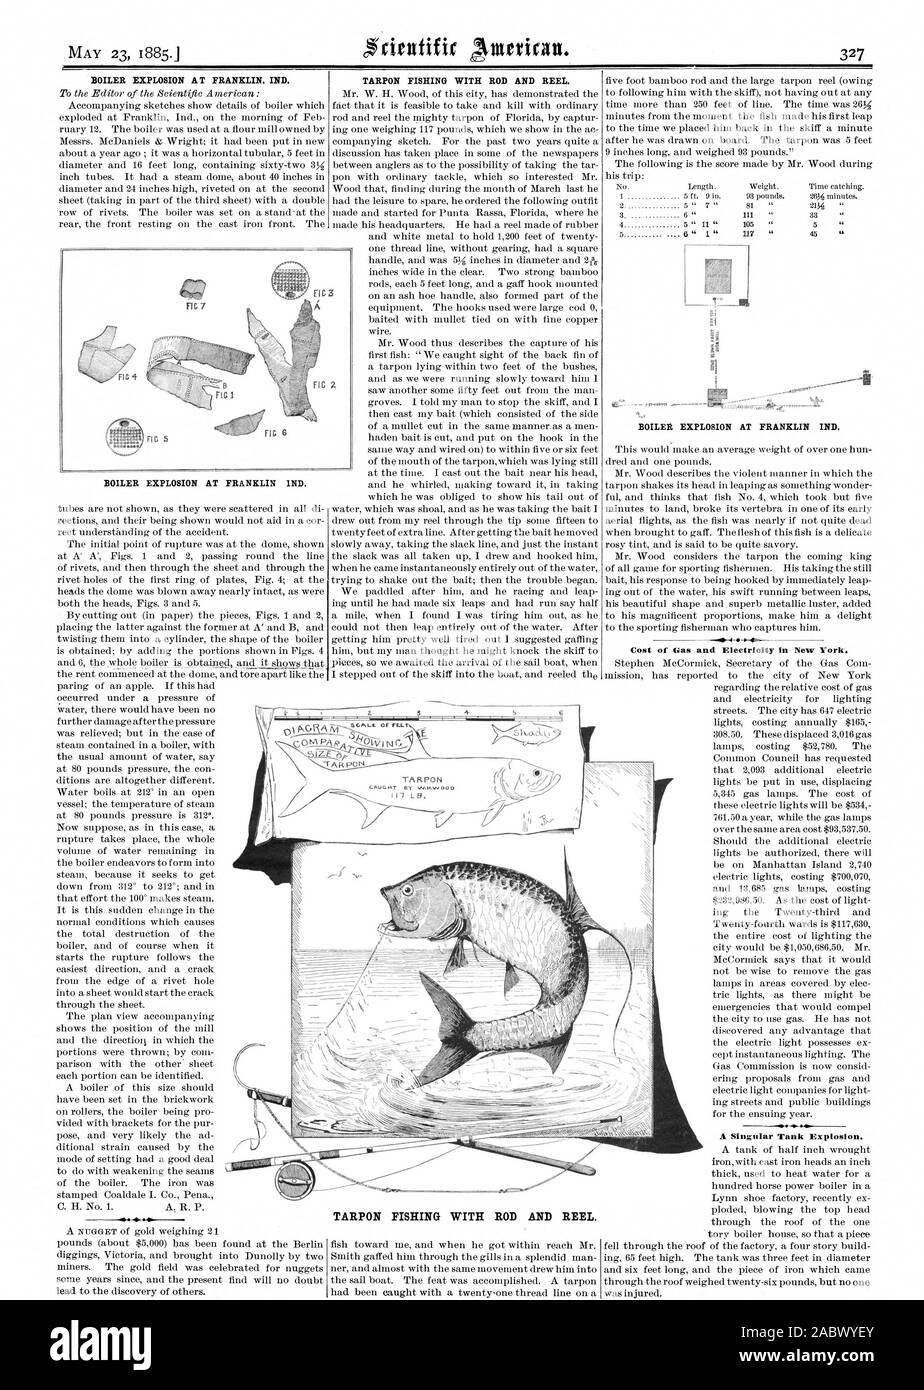 BOILER EXPLOSION AT FRANKLIN IND. BOILER EXPLOSION AT FRANKLIN IND. TARPON FISHING WITH ROD AND REEL. BOILER EXPLOSION AT FRANKLIN IND. Cost of Gas and Electricity in New York. A Singular Tank Explosion. TARPON FISHING WITH ROD AND REEL., scientific american, 1885-05-23 Stock Photo